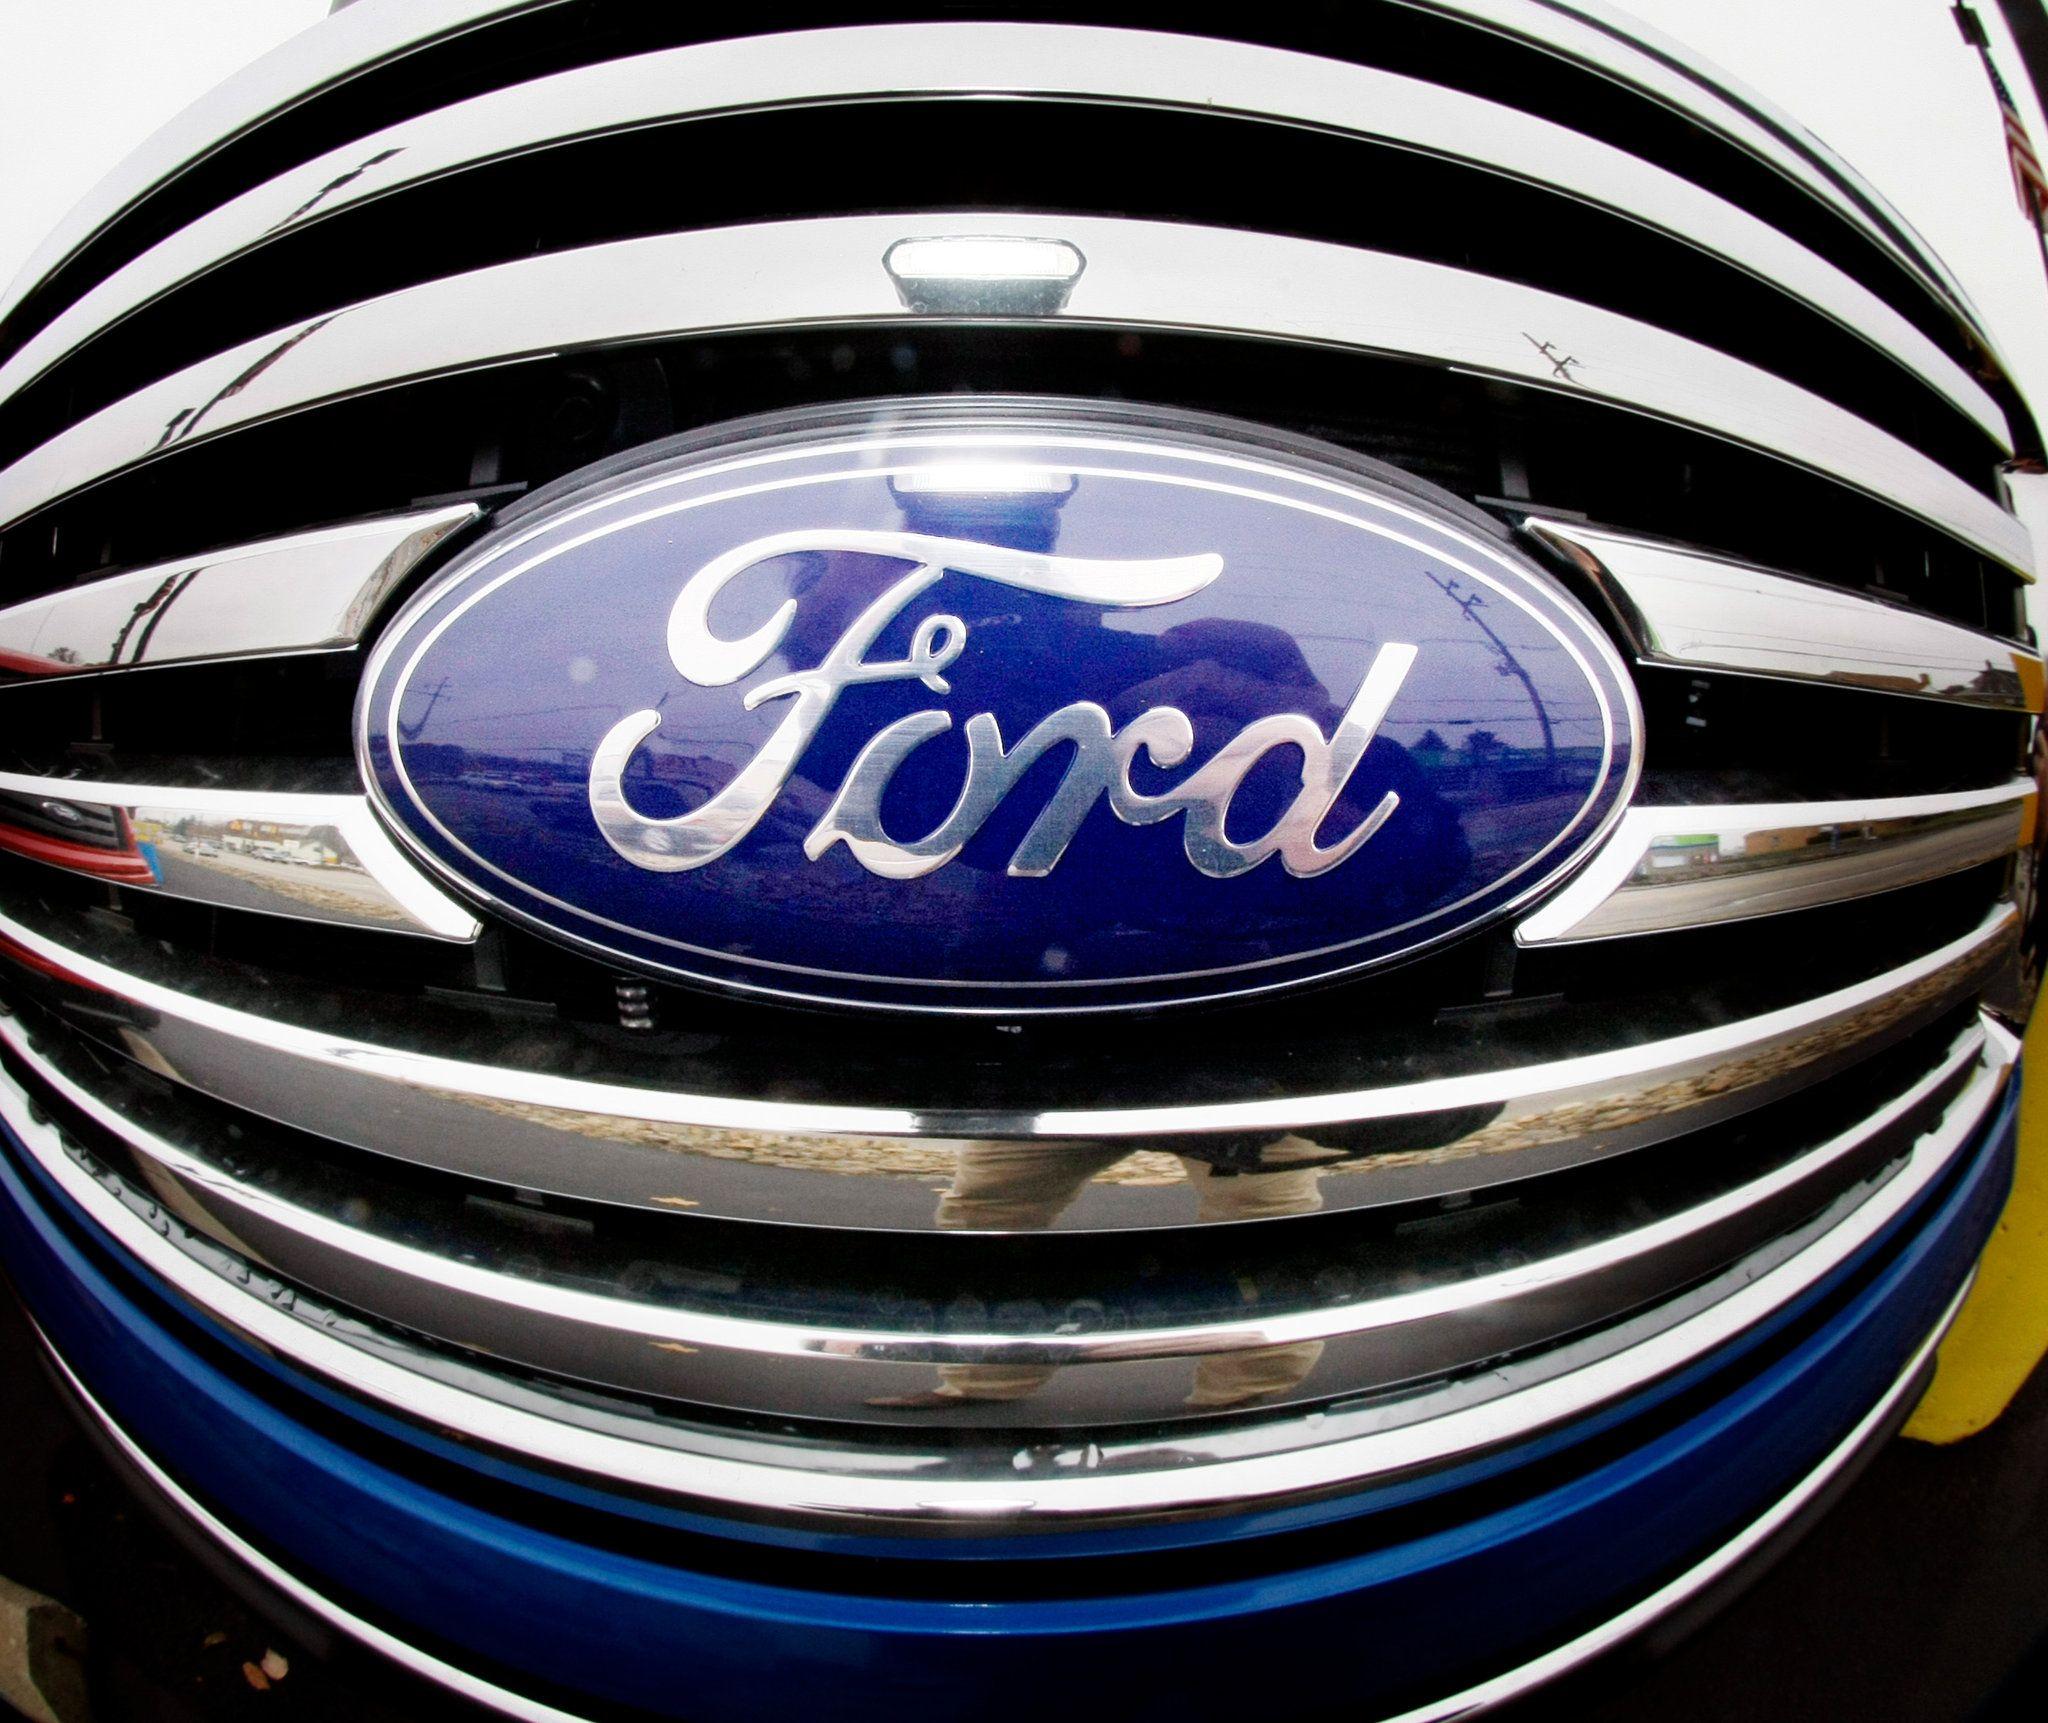 New Ford Truck Logo - A Prized Logo Is Returned to Ford - The New York Times